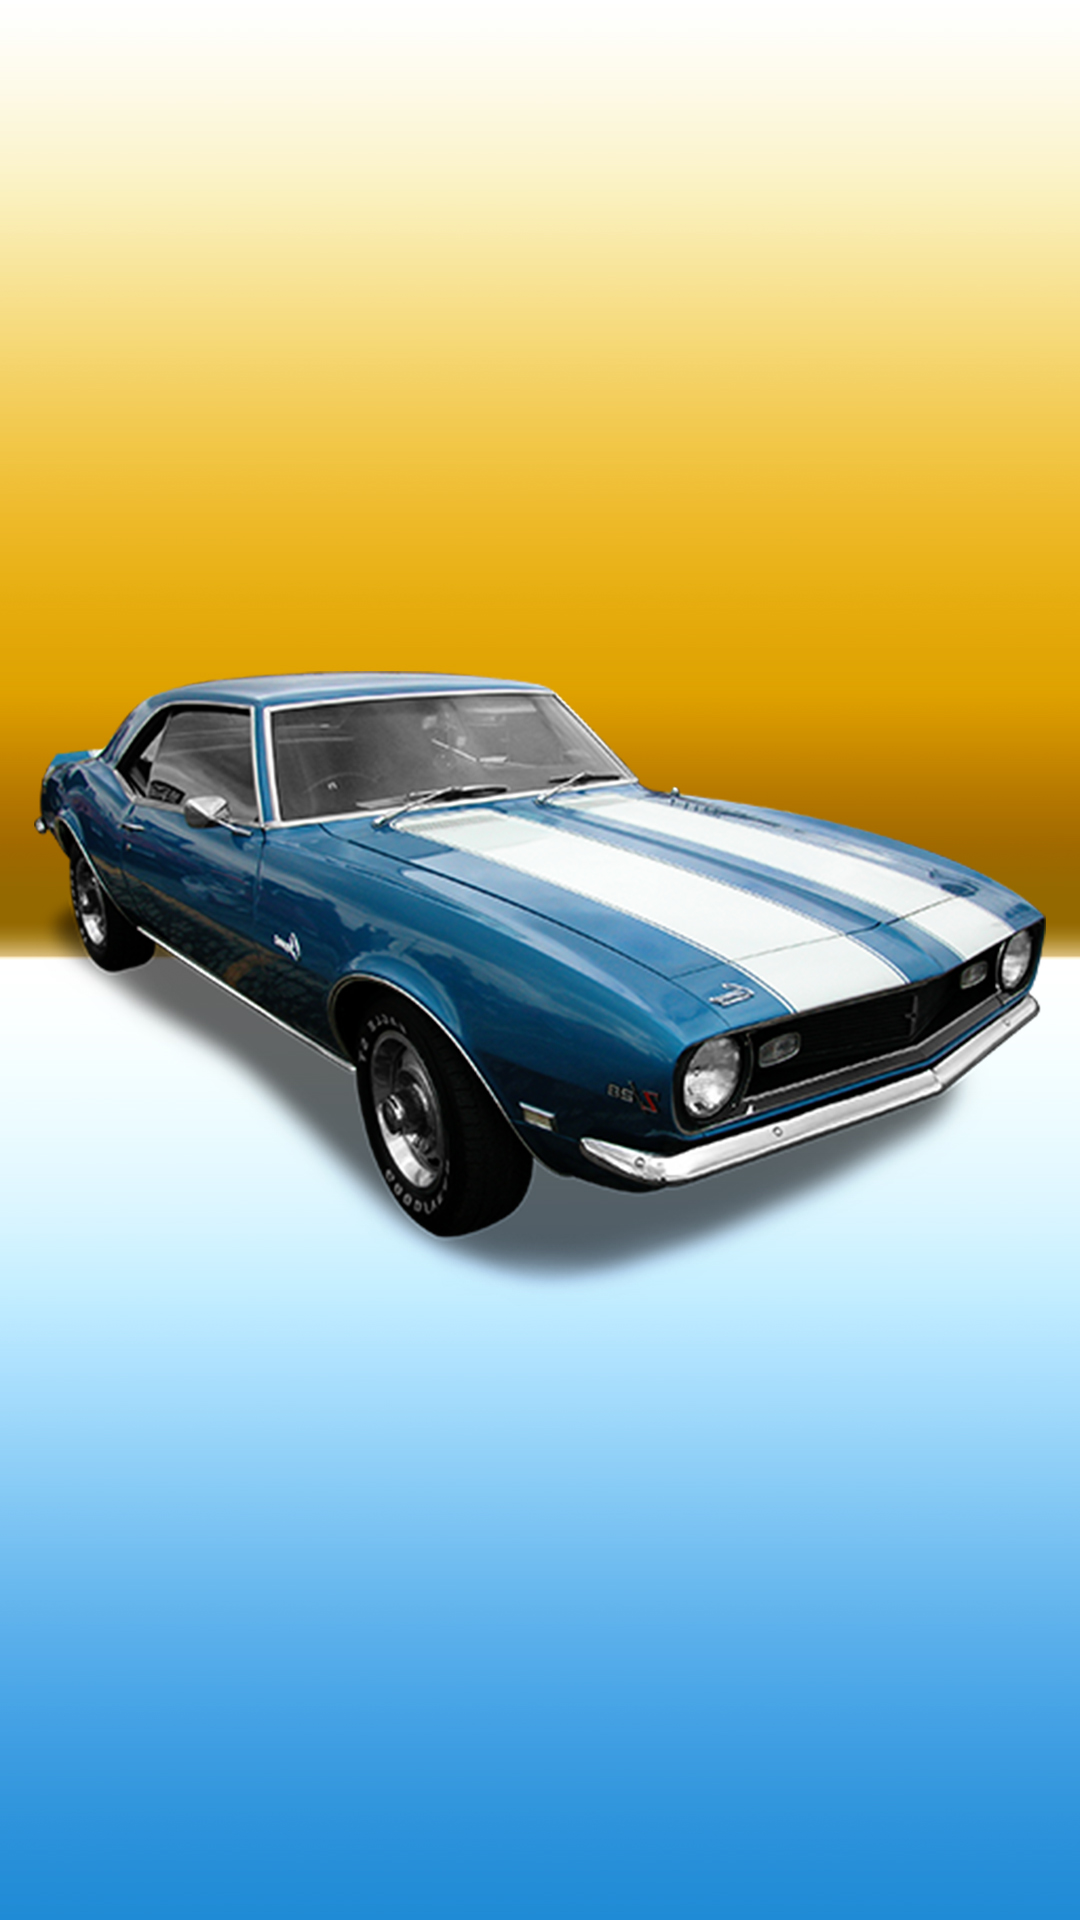 Muscle Car Phone Wallpaper - Muscle Car Wallpaper For Mobile , HD Wallpaper & Backgrounds